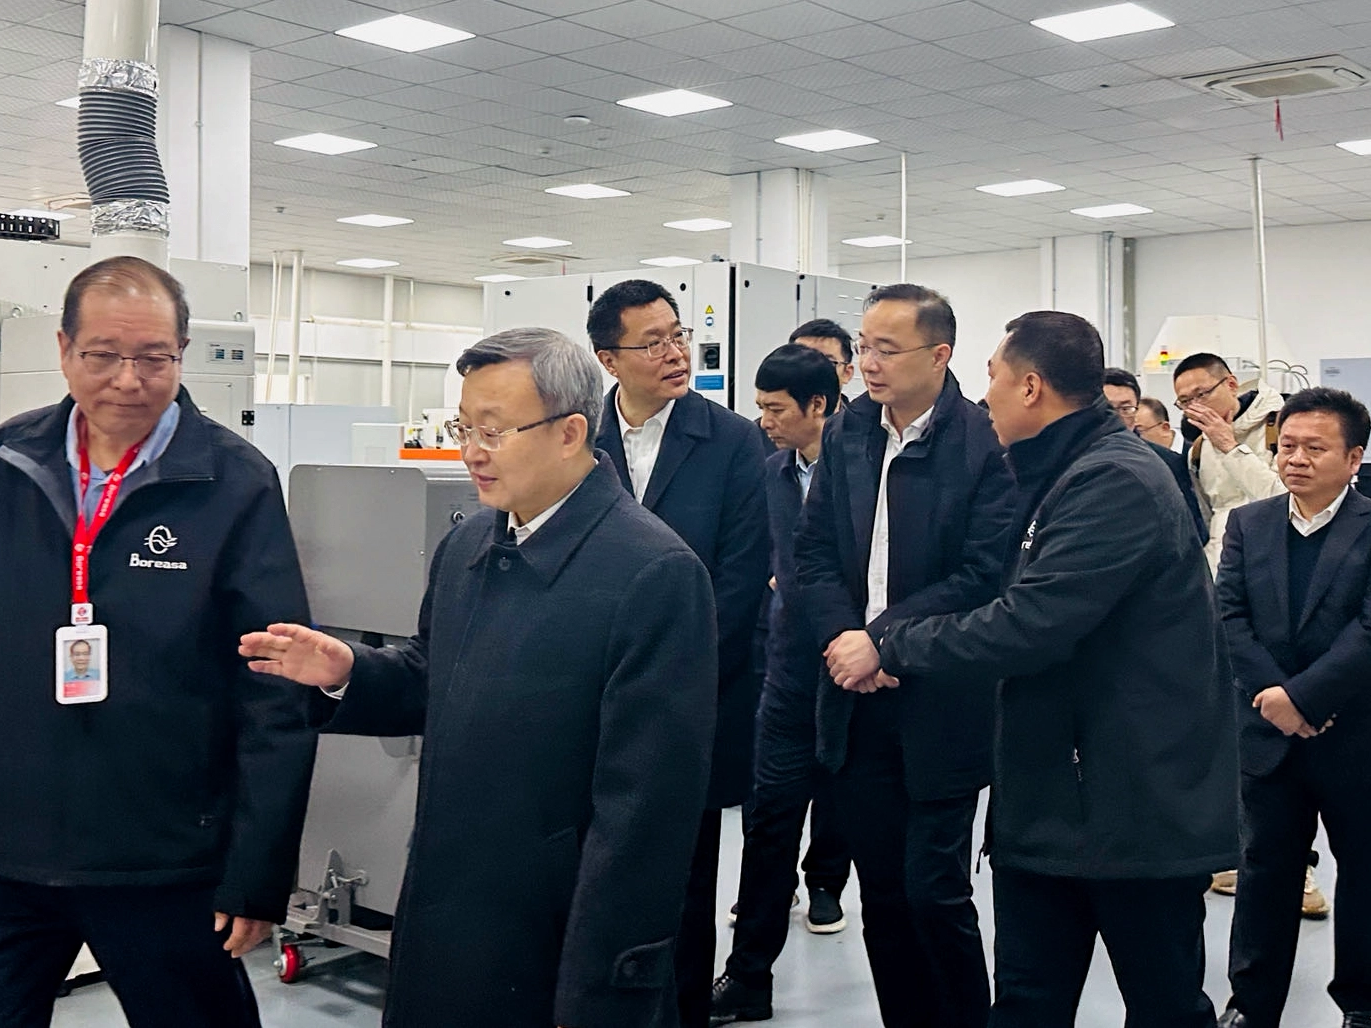 Wang Shouwen, International Trade Negotiator and Vice Minister of the Ministry of Commerce of China, visited Boreasa to evaluate our capacities.